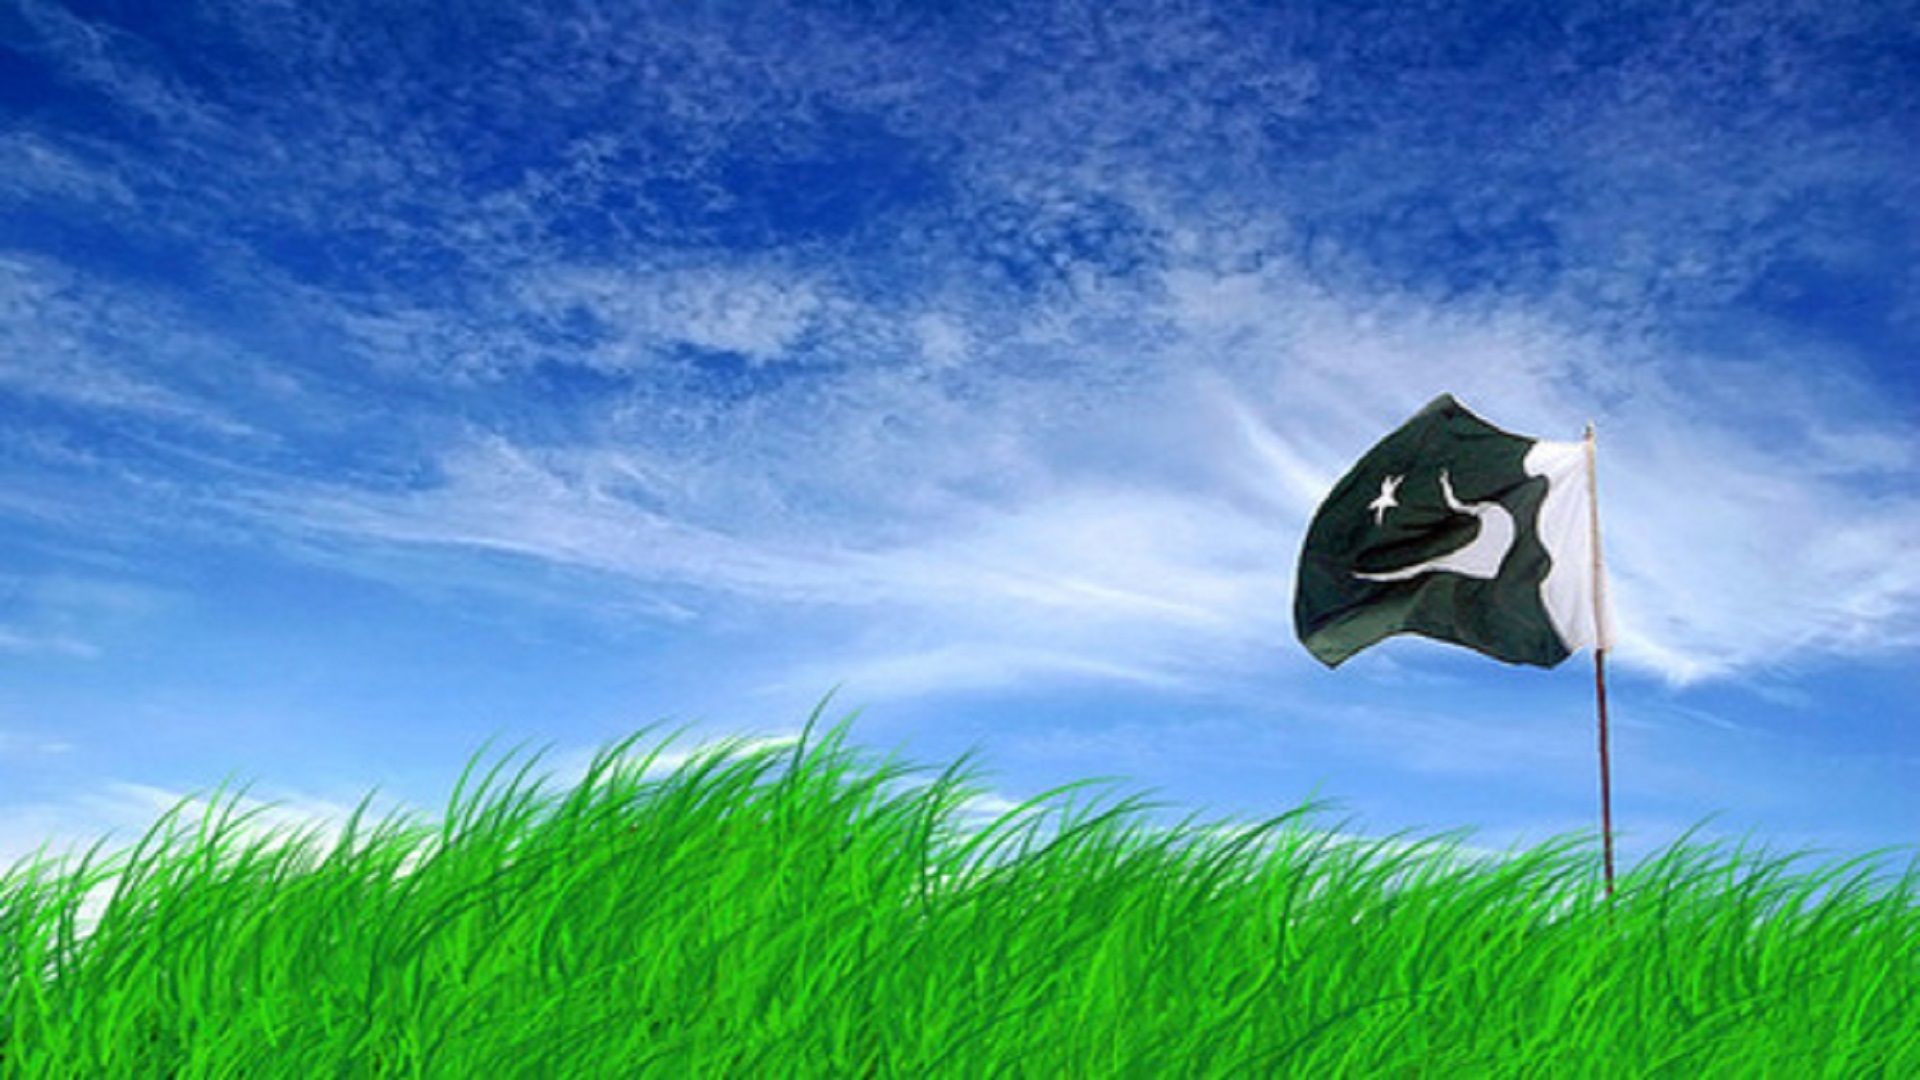 1920x1080 1600x1200 Arts and Image: the best wallpapers you find here: Pakistan Flag  ...">